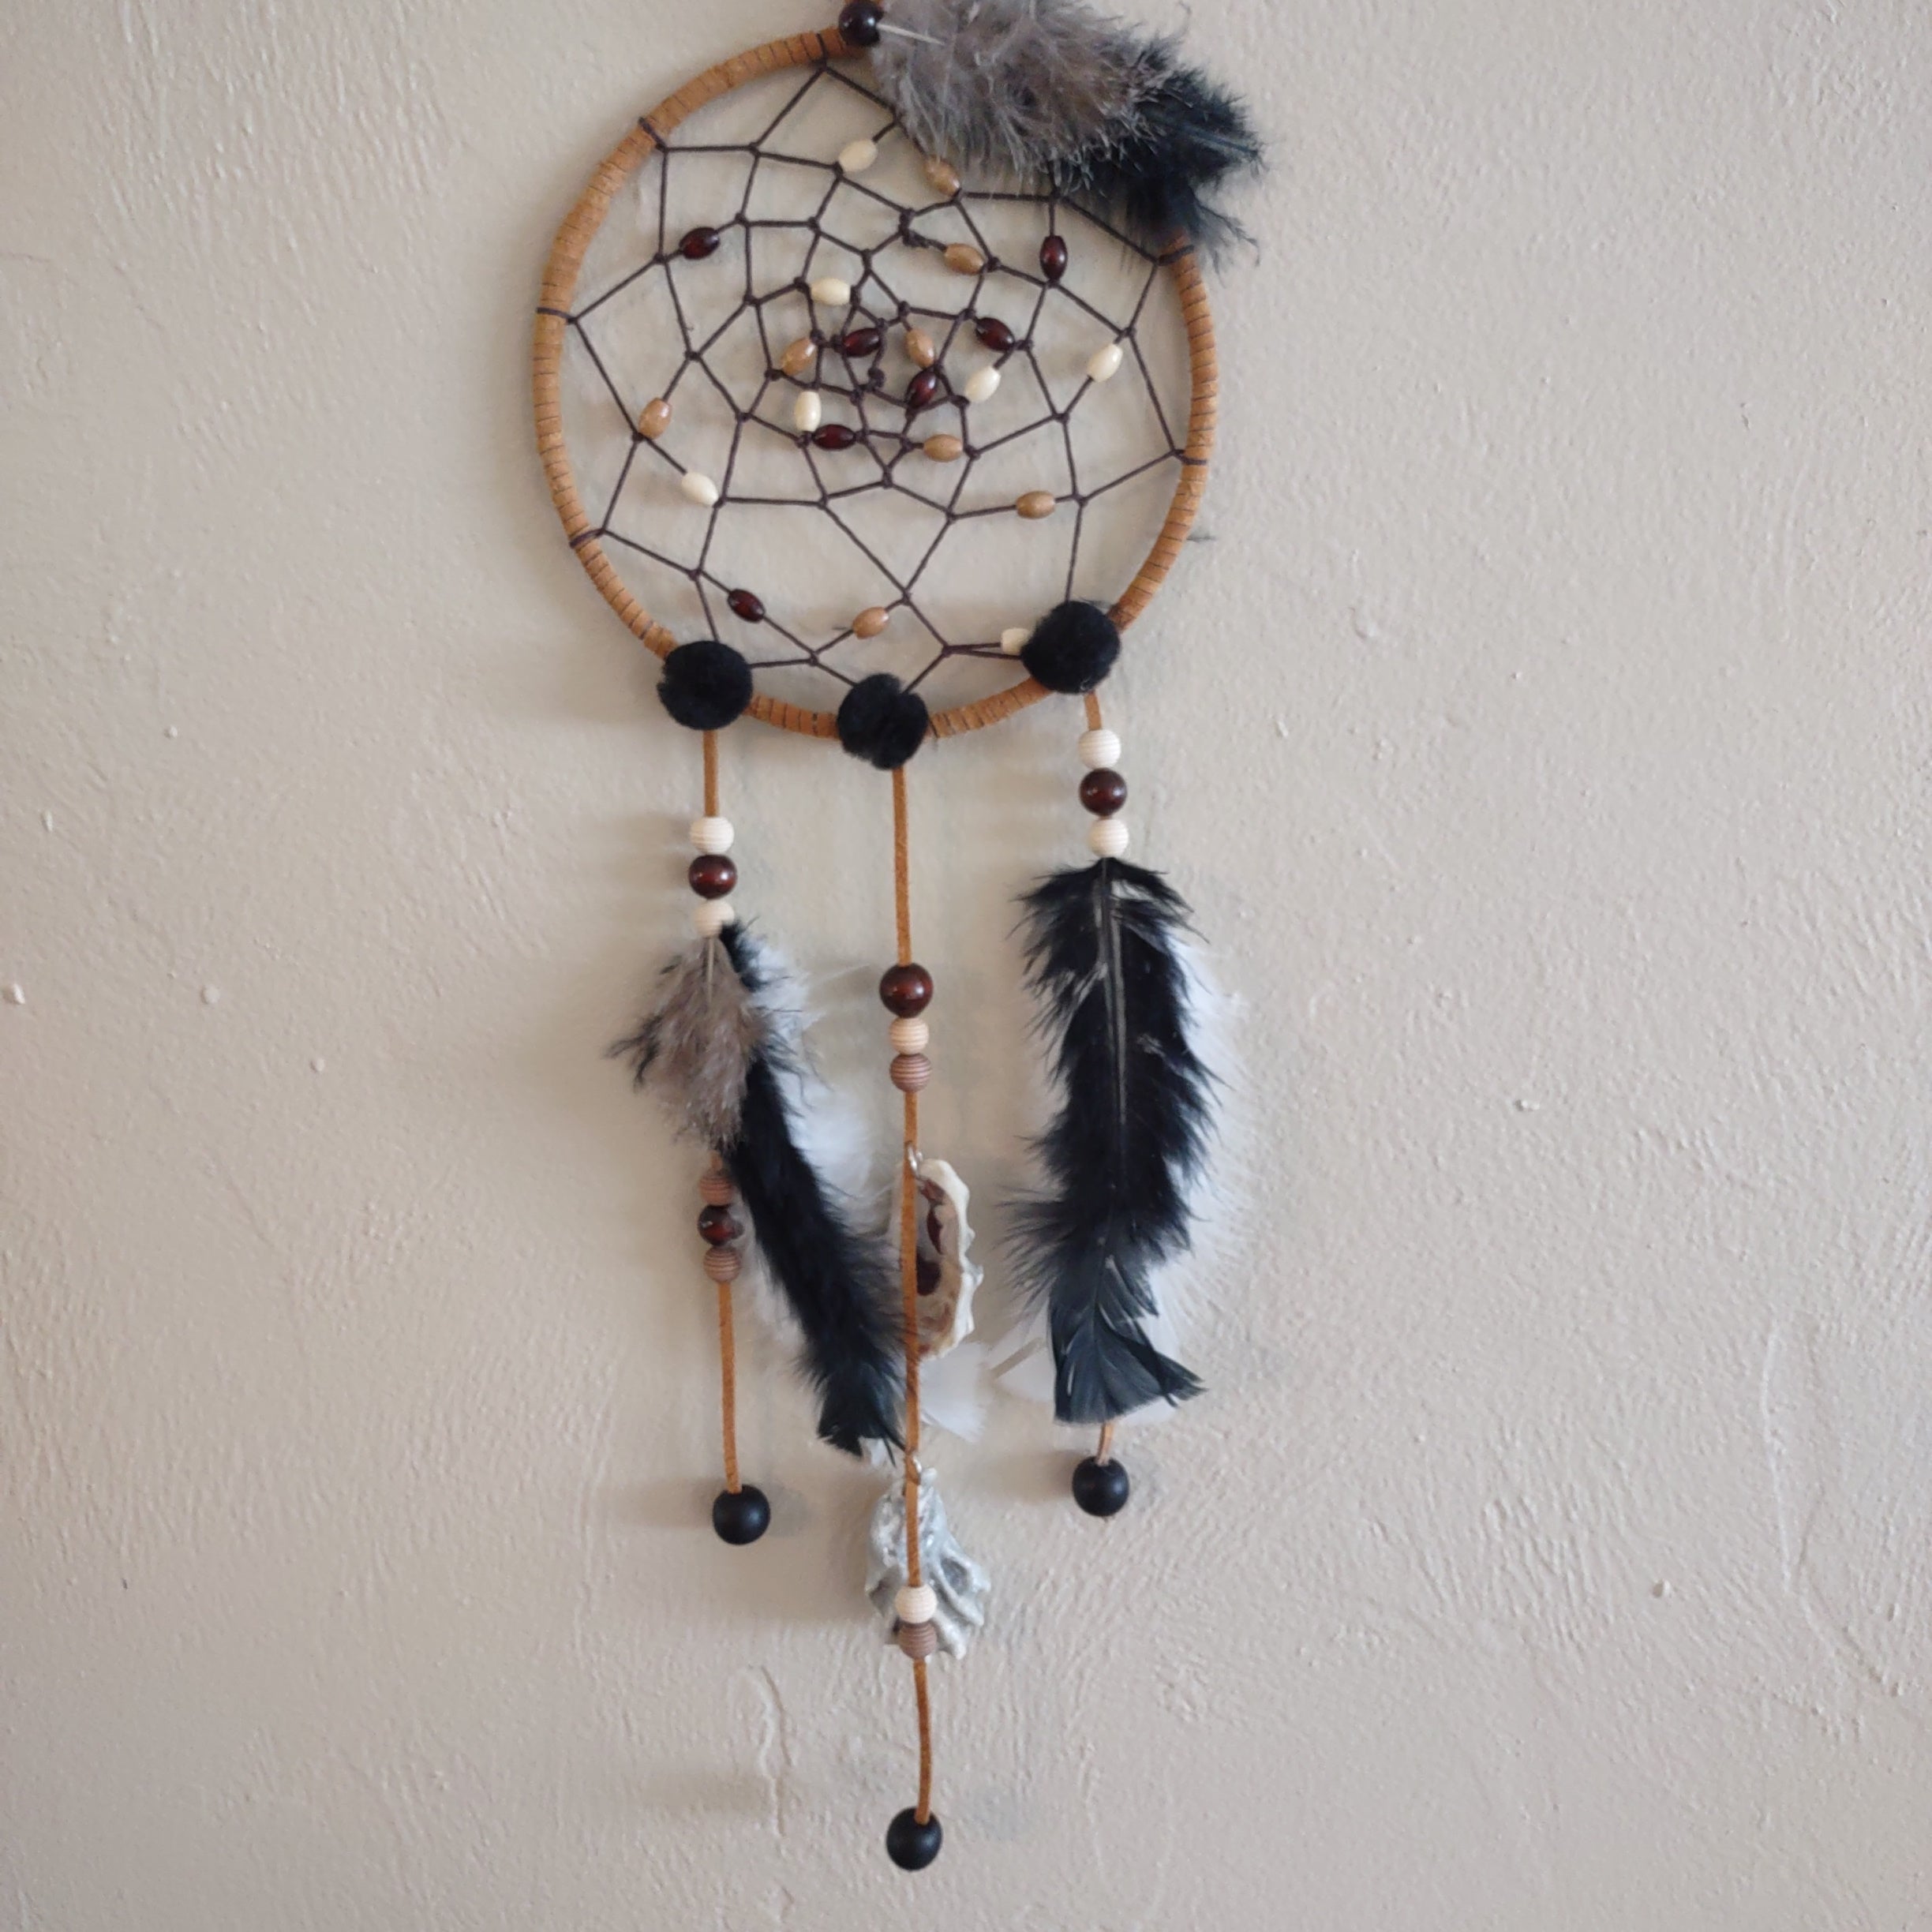 Dreamcatcher with Oyster shells